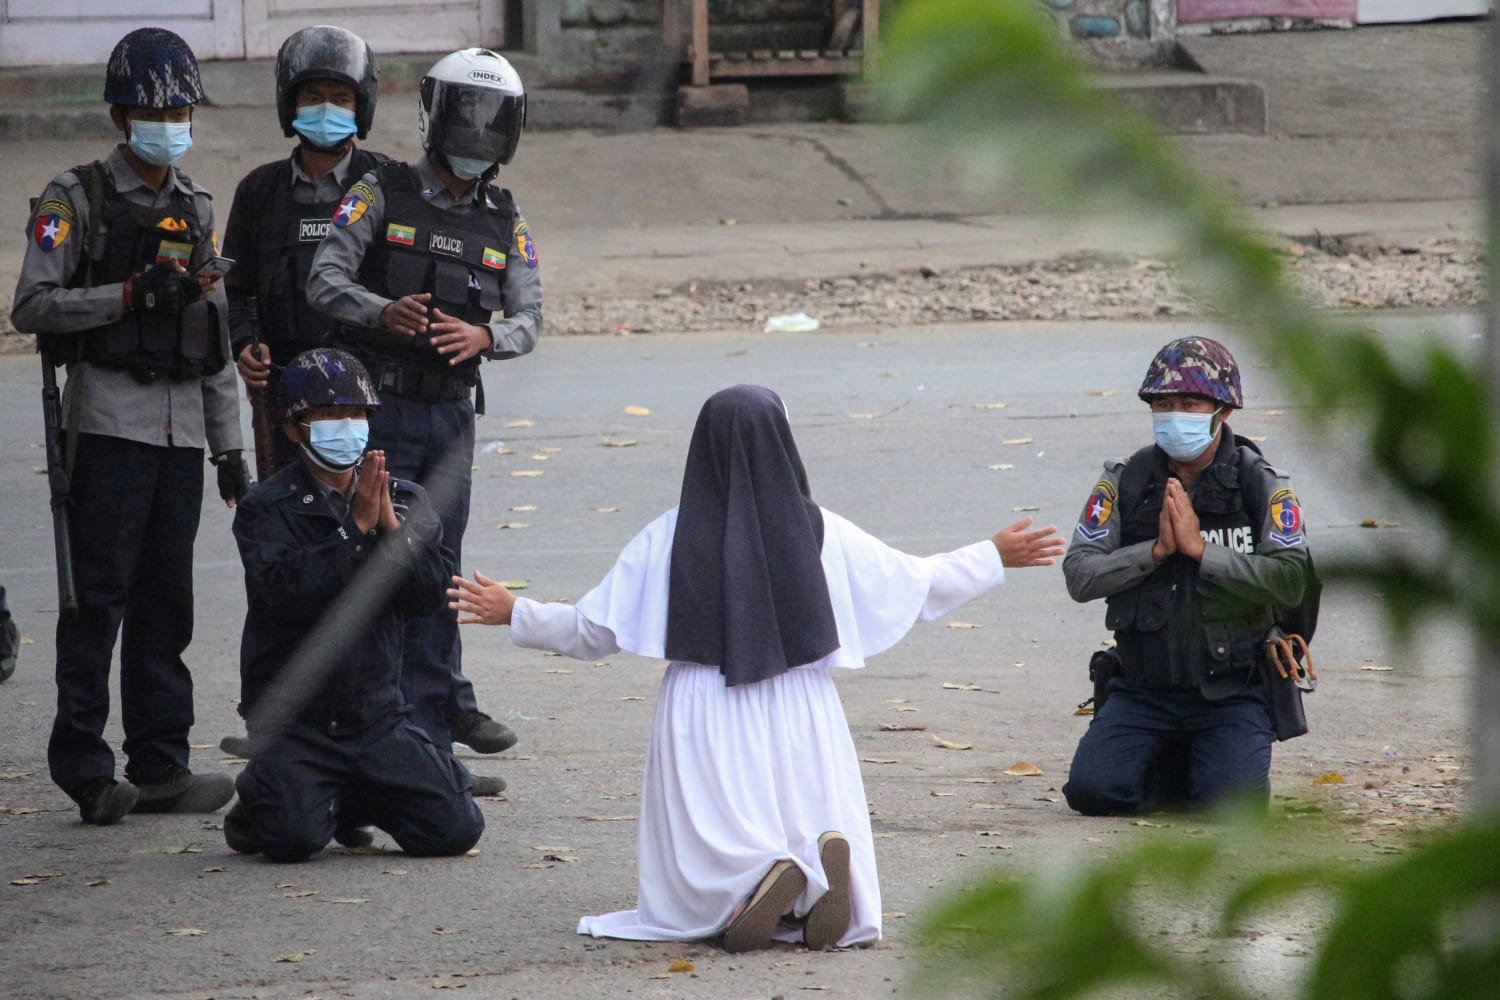 A nun in Myanmar kneeled in front of police begging them not to attack protesters: "Kill me instead." Police shot at protesters anyway, killing at least 2. She said she saw a "young kid's head had exploded and... a river of blood on the street." (Photo: Myitkyina News Journal)